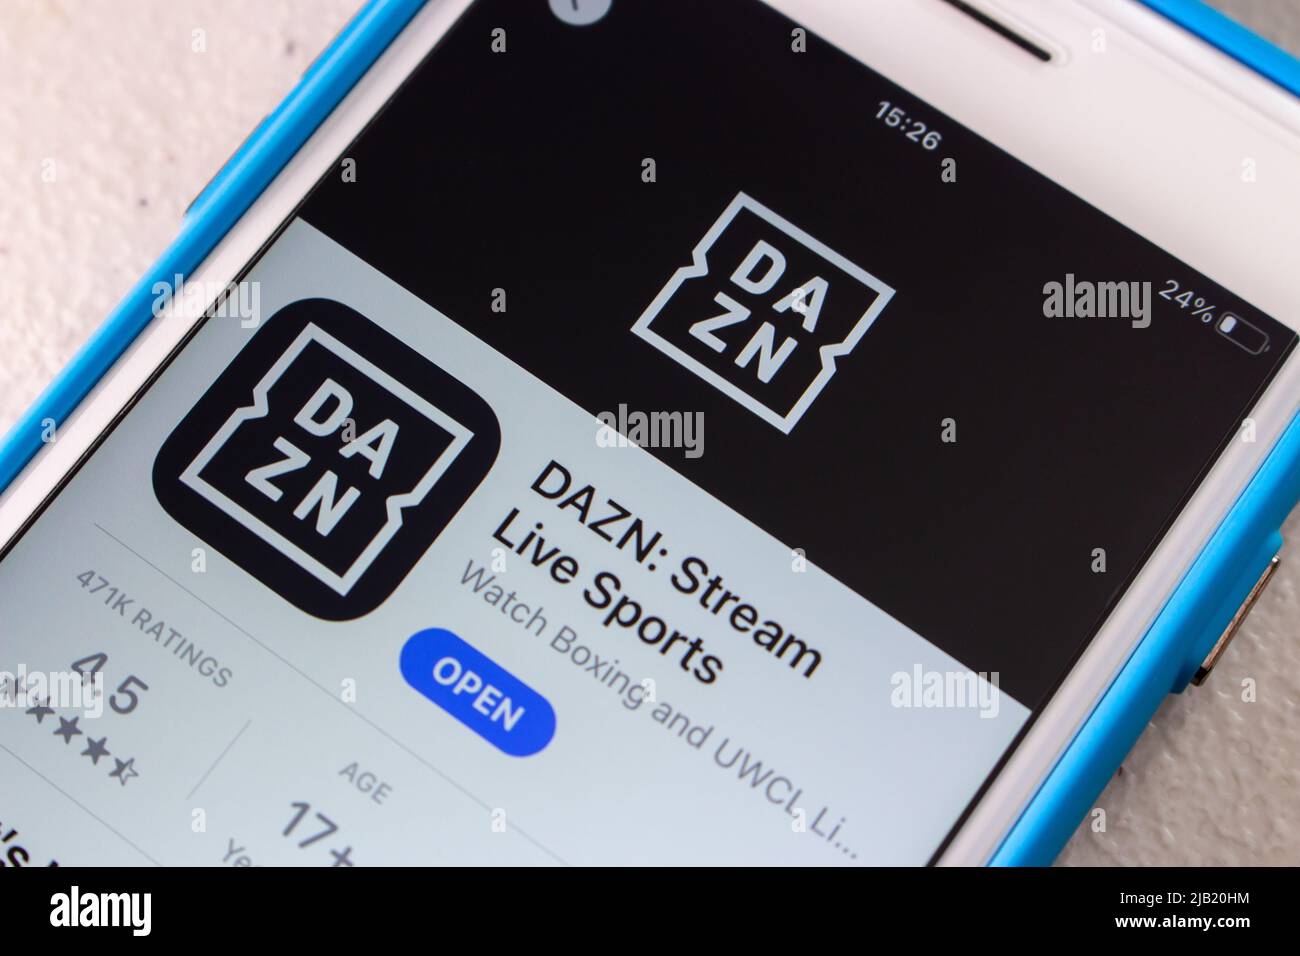 Logo of DAZN, international over-the-top sports (OTT) subscription video streaming service available in over 200 countries, in App Store on iPhone Stock Photo